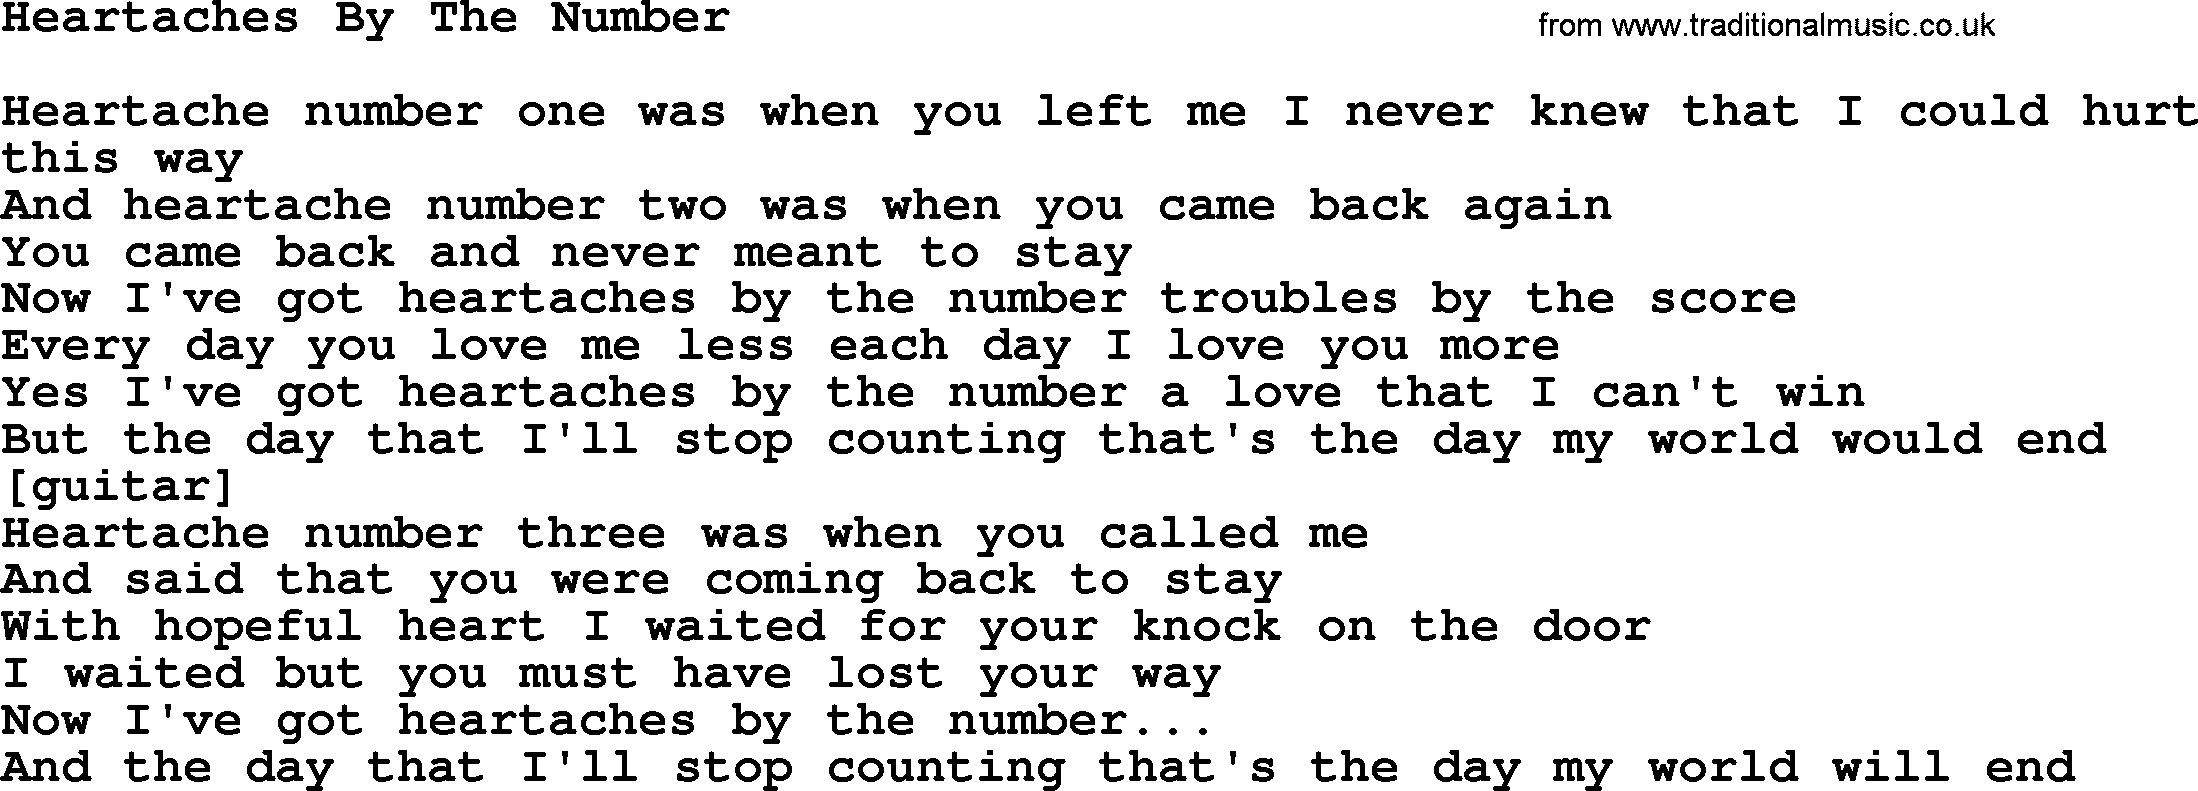 Willie Nelson song: Heartaches By The Number lyrics